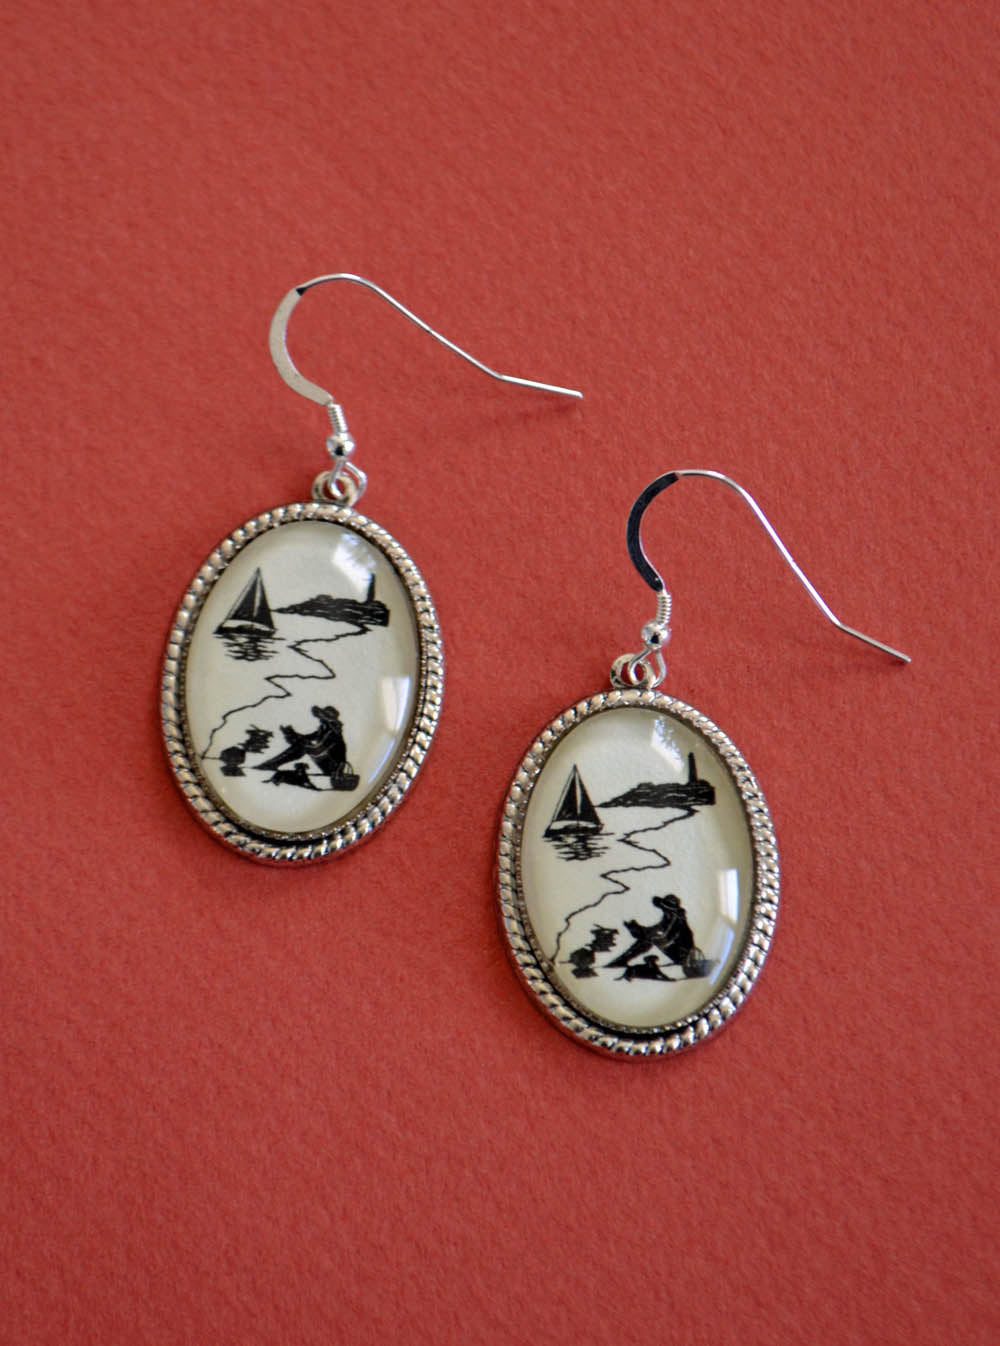 AFTERNOON READING on the BEACH Earrings - Silhouette Jewelry